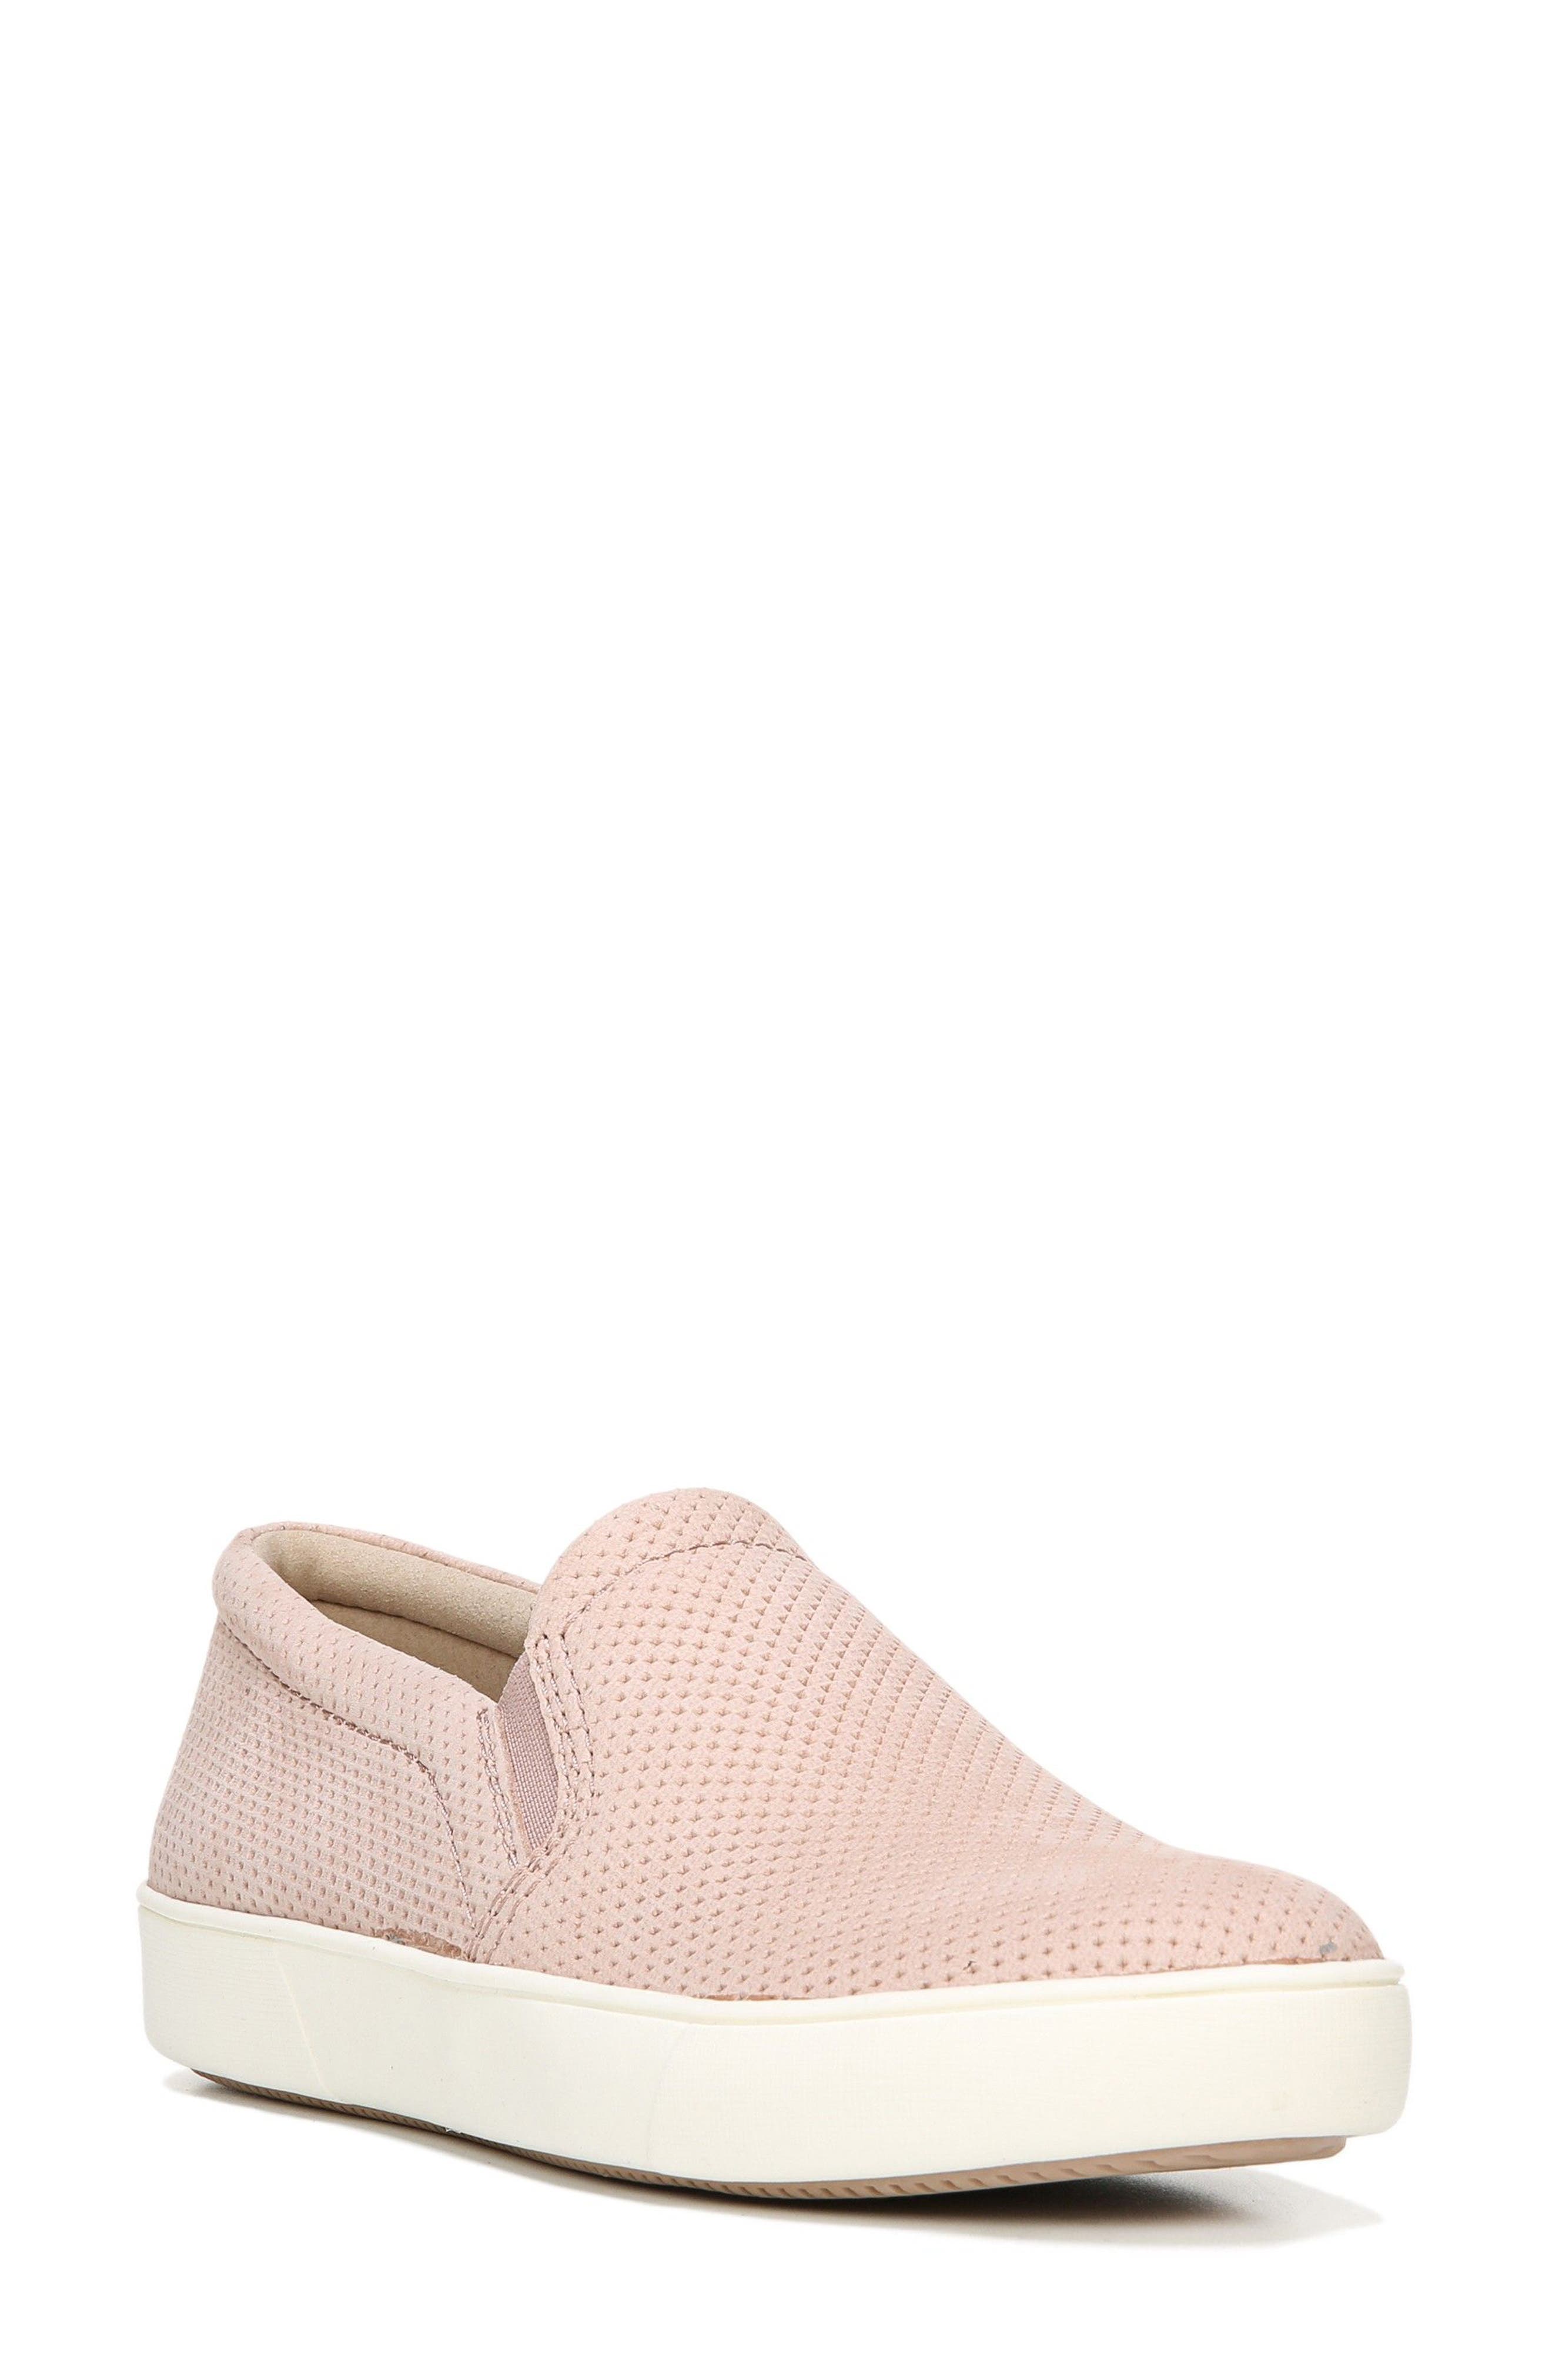 Narrow Width Shoes | Nordstrom